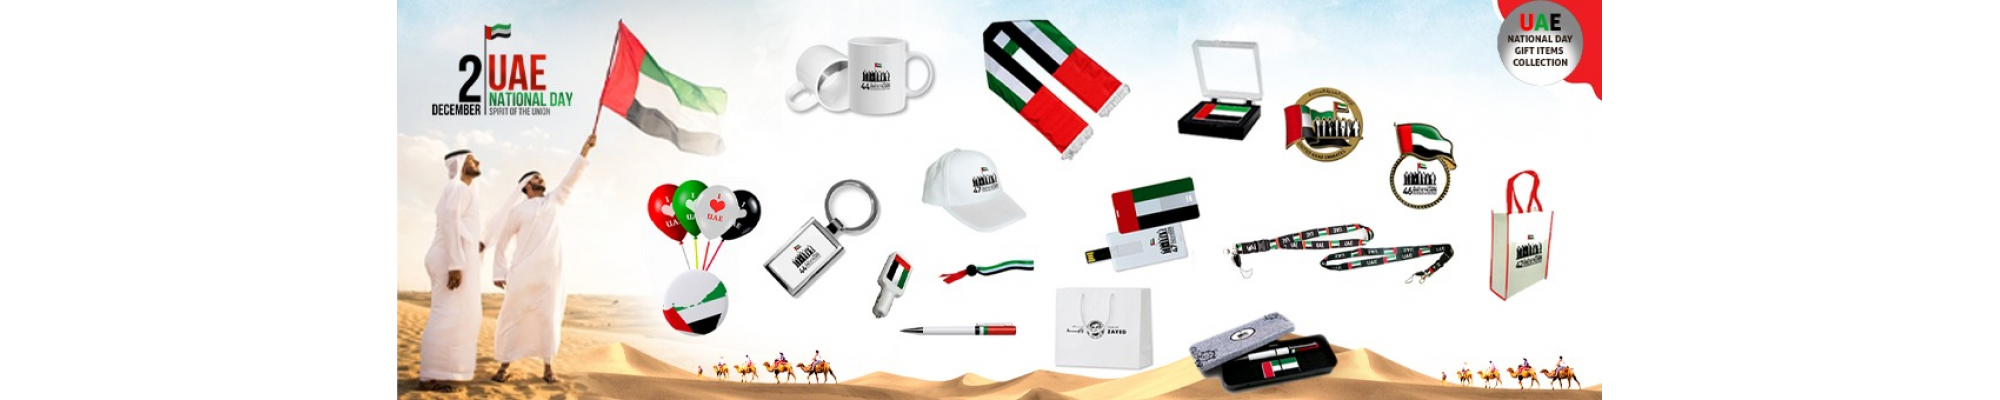 National day collections